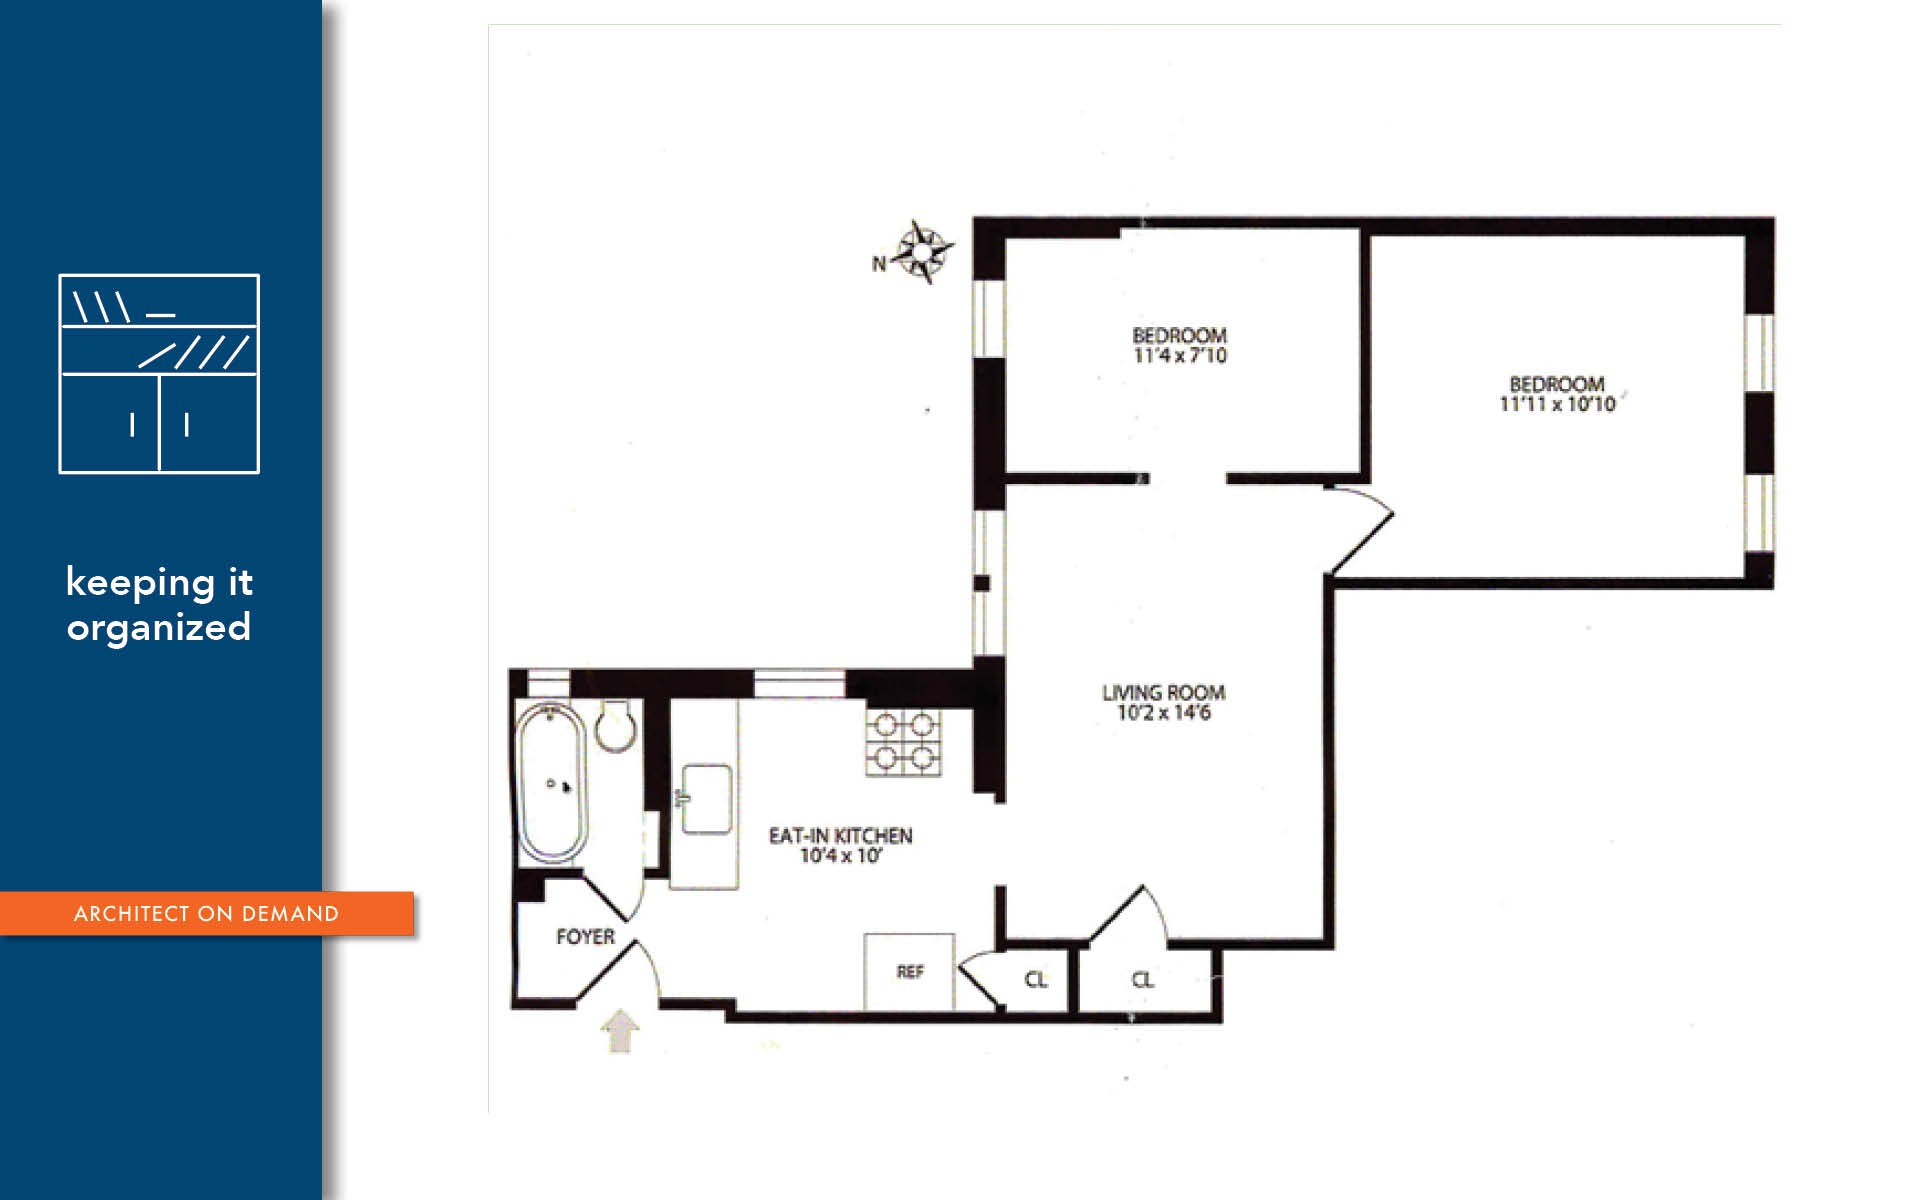 space planning, foyer, architect on demand, advice without strings